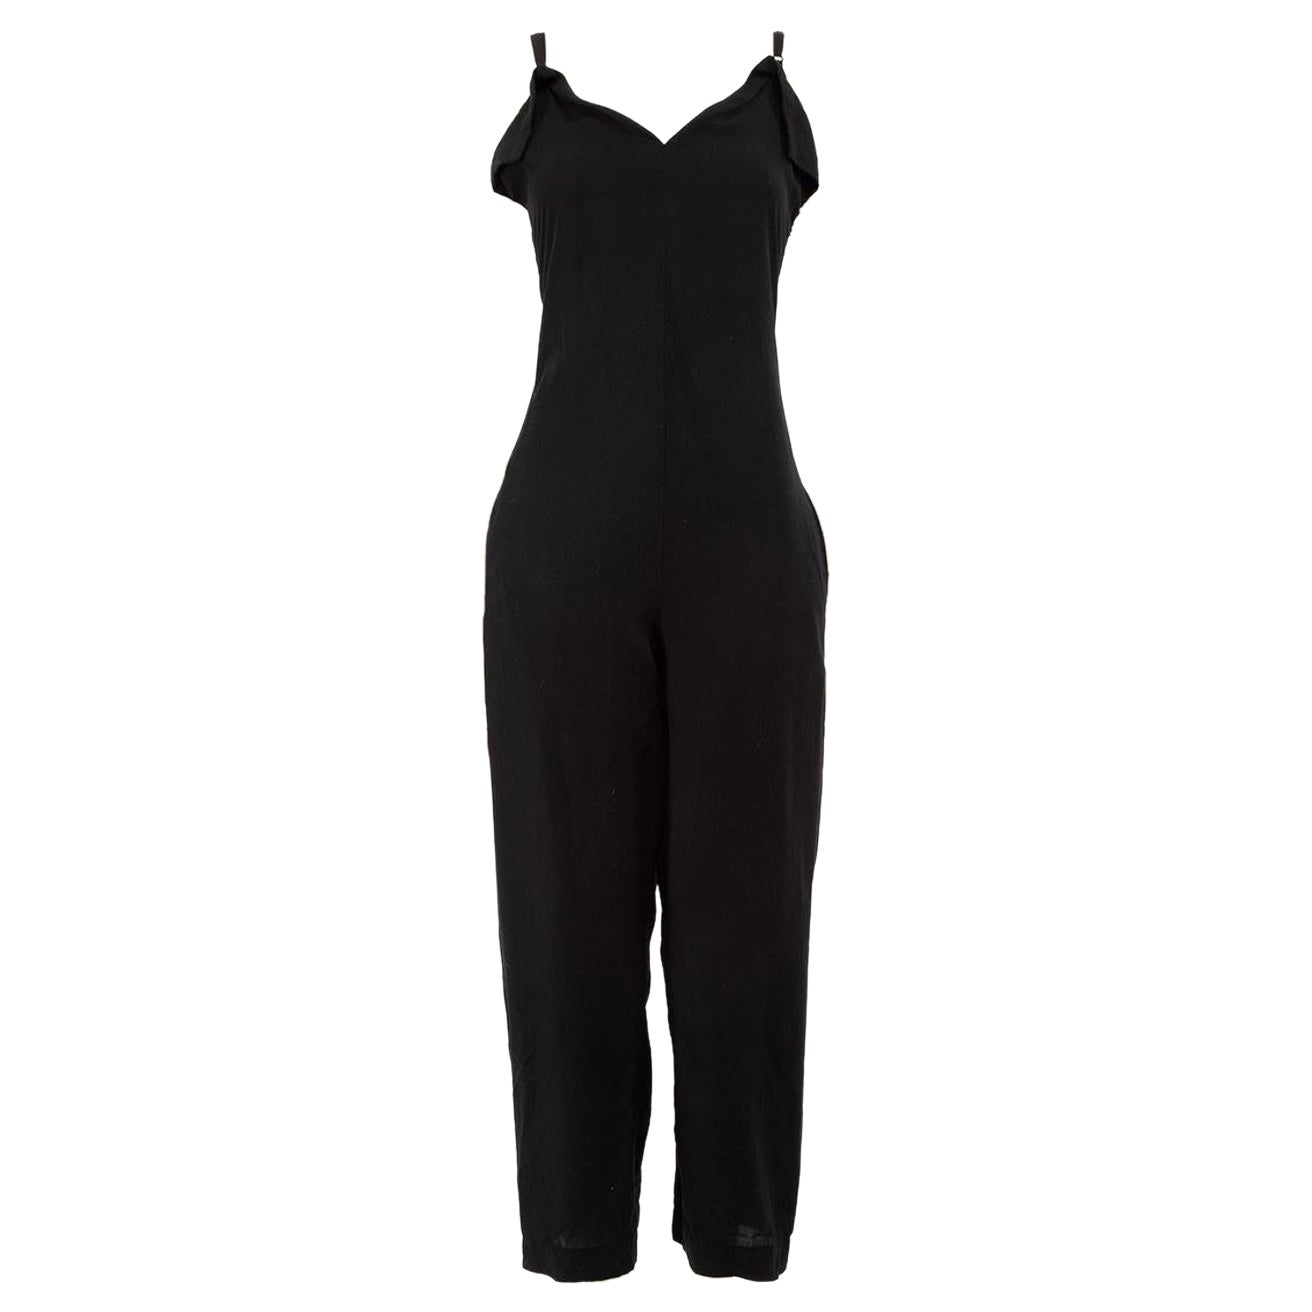 Yohji Yamamoto Michiko by Y's Black Lace Up Back Jumpsuit Size S For Sale